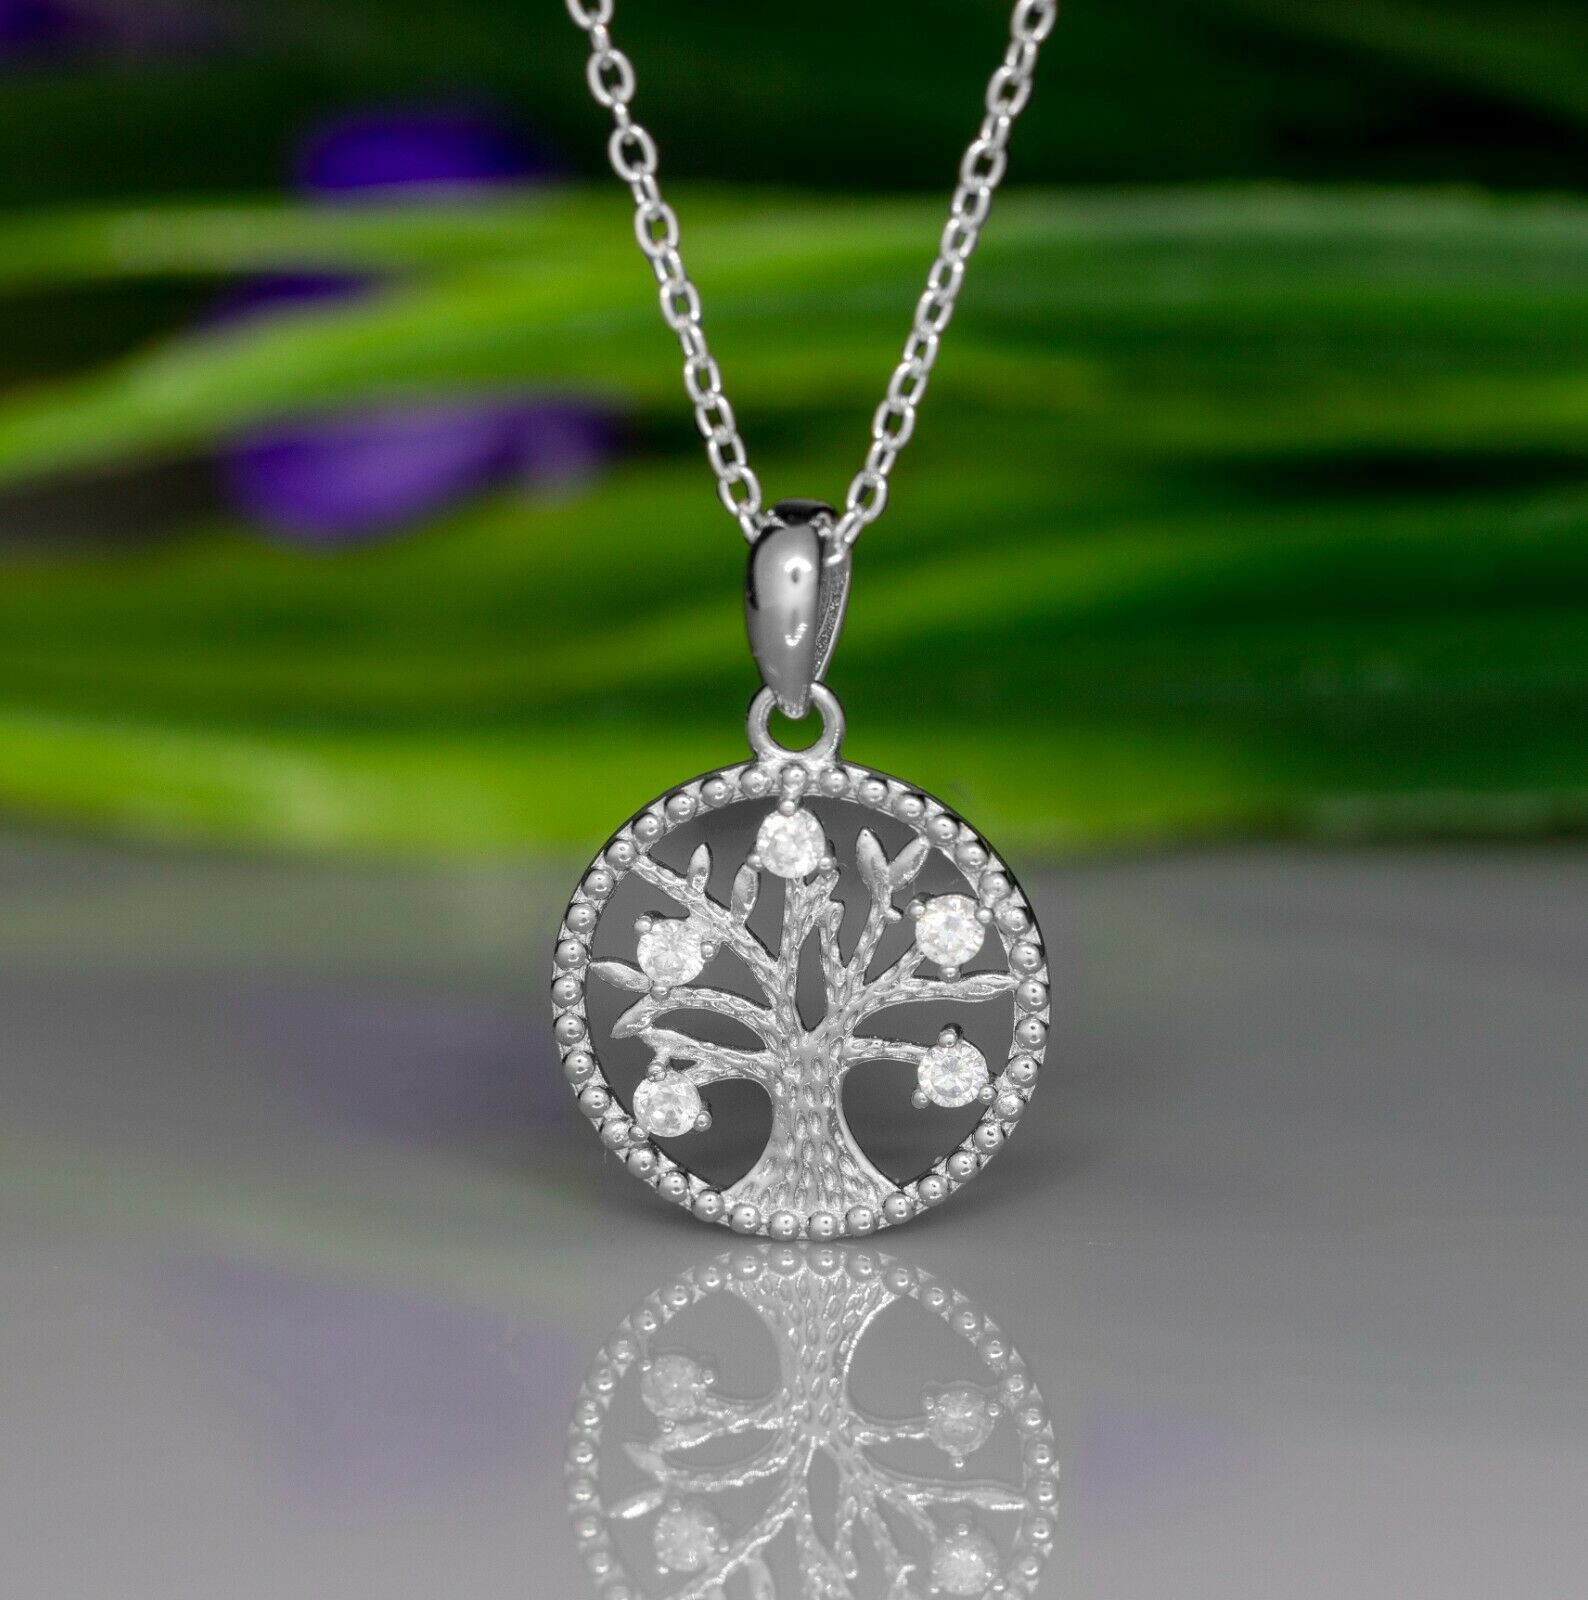 Sterling Silver 925 Diamond Pendant Necklace Tree Of Life Ladies Jewellery Gift